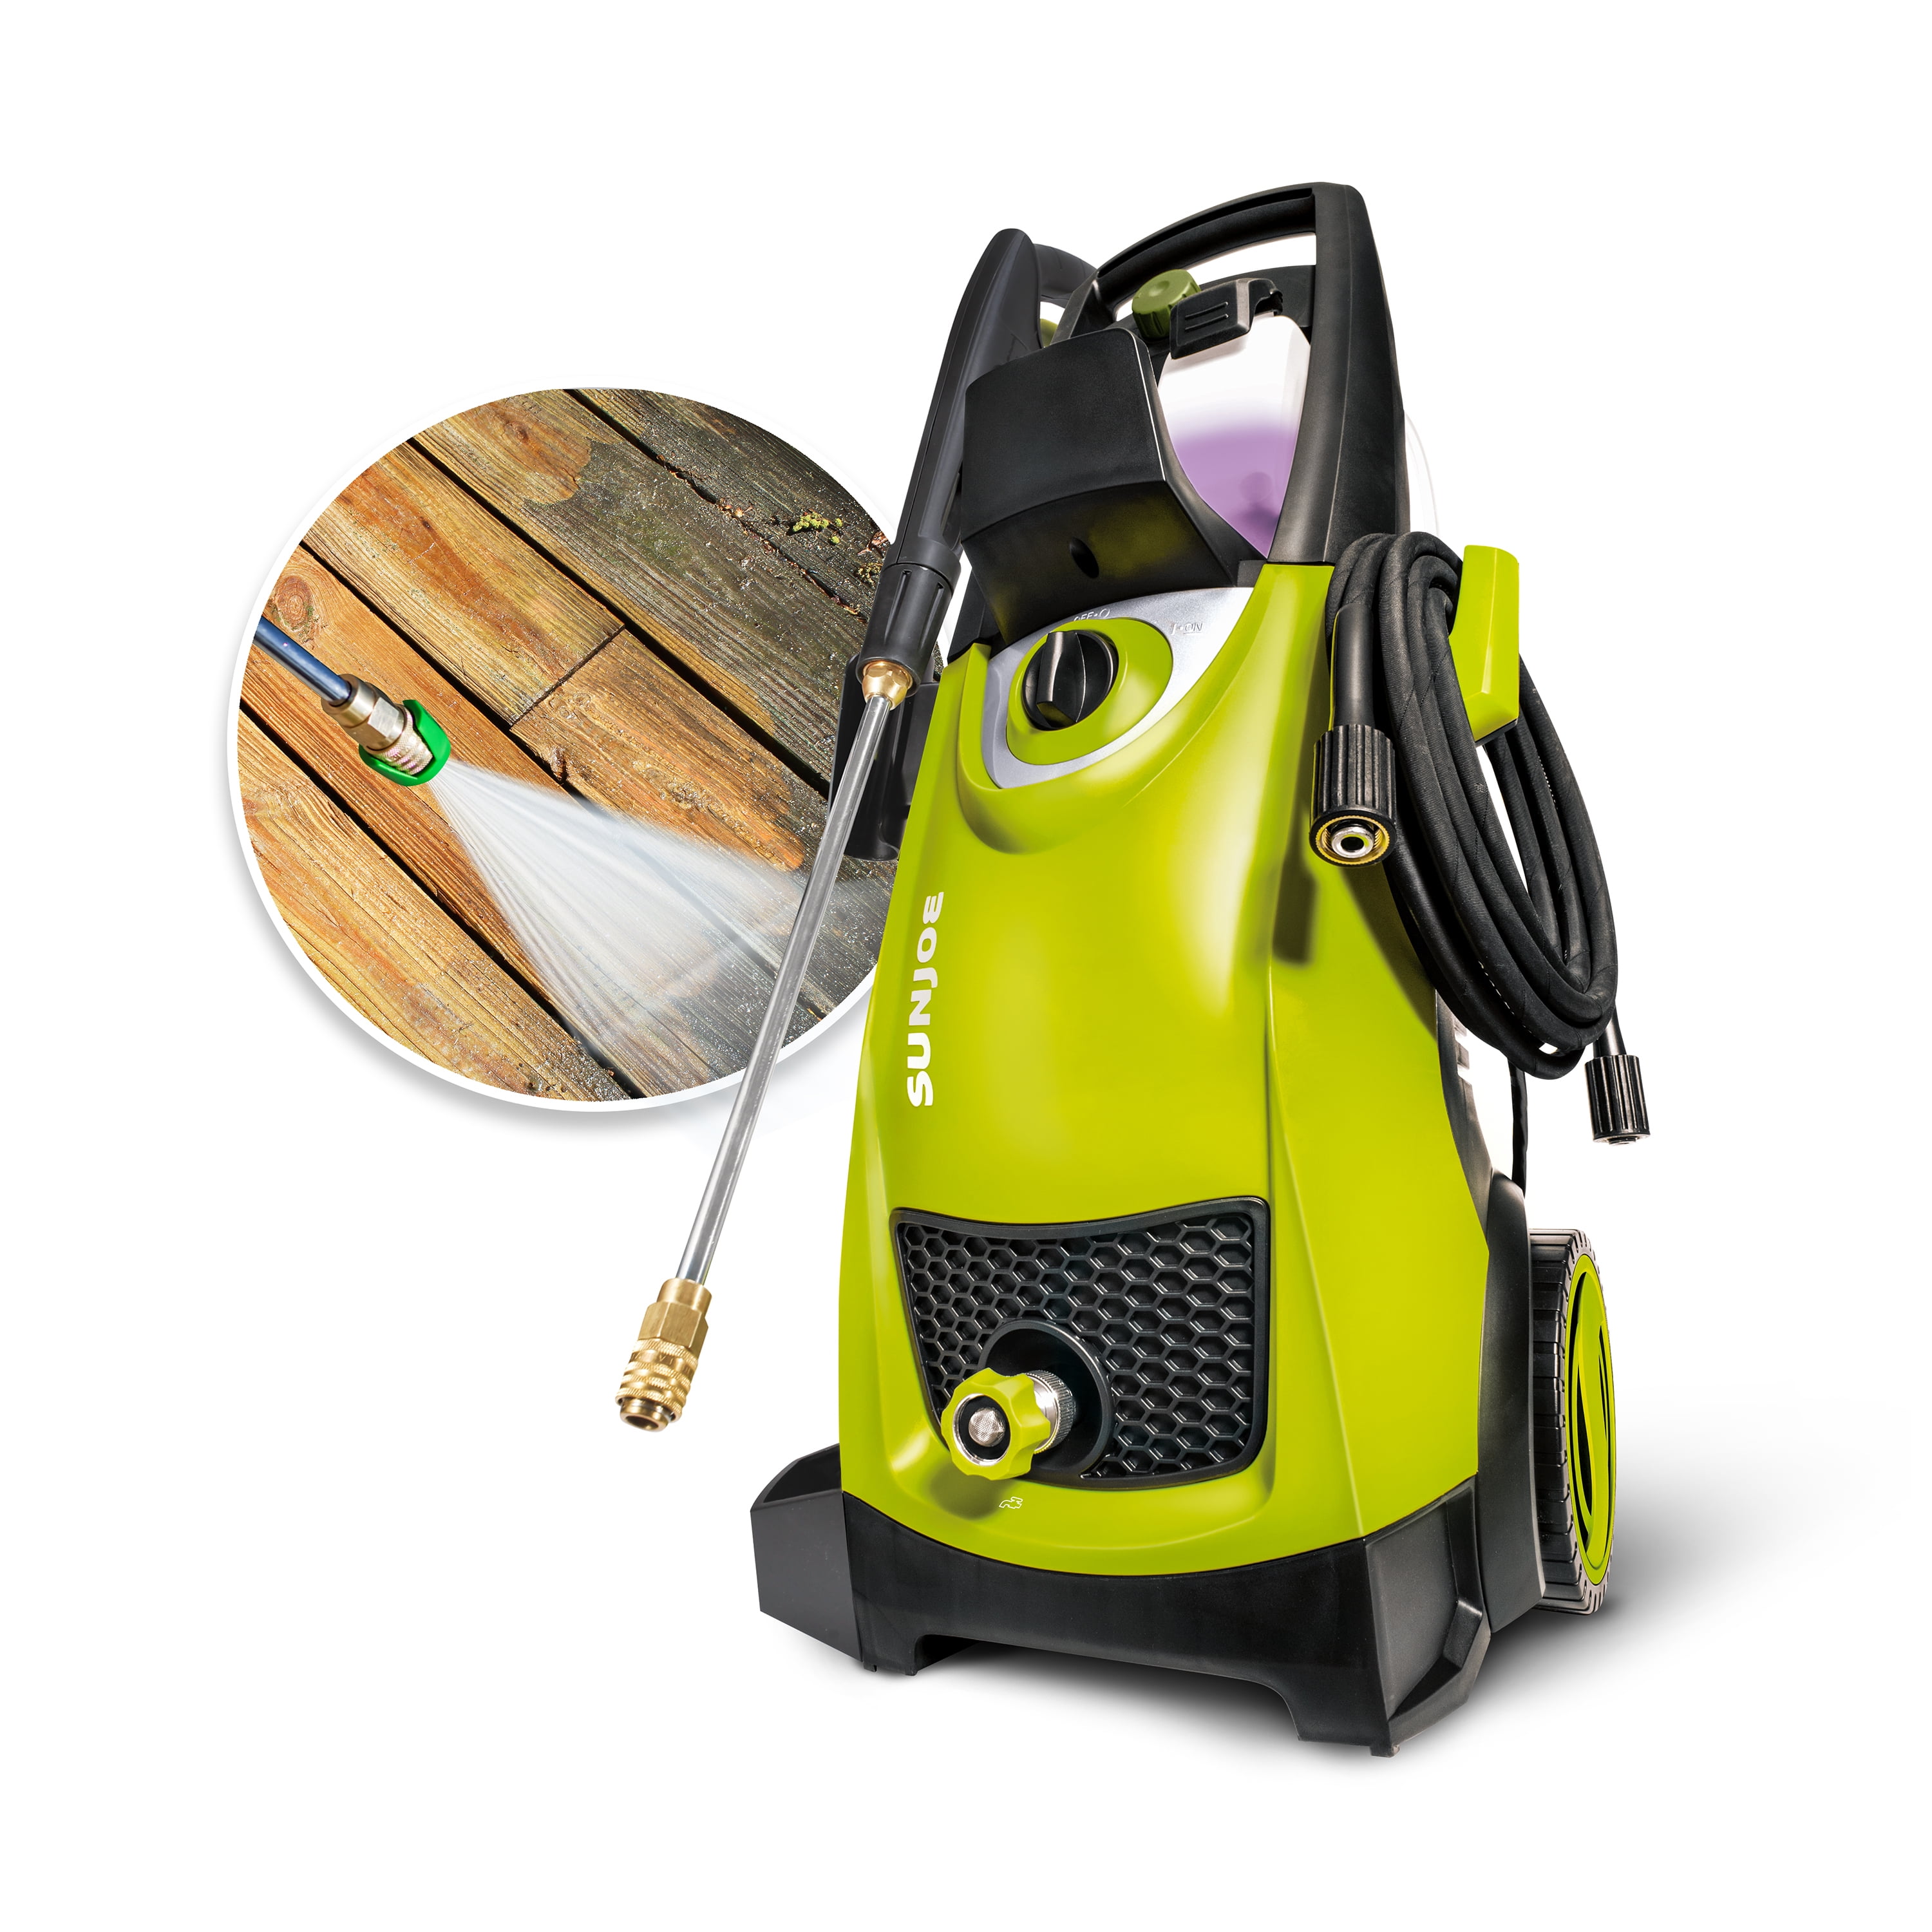 Sun Joe SPX3000 Electric Pressure Washer, 14.5-Amp, Quick-Connect Tips - image 1 of 25